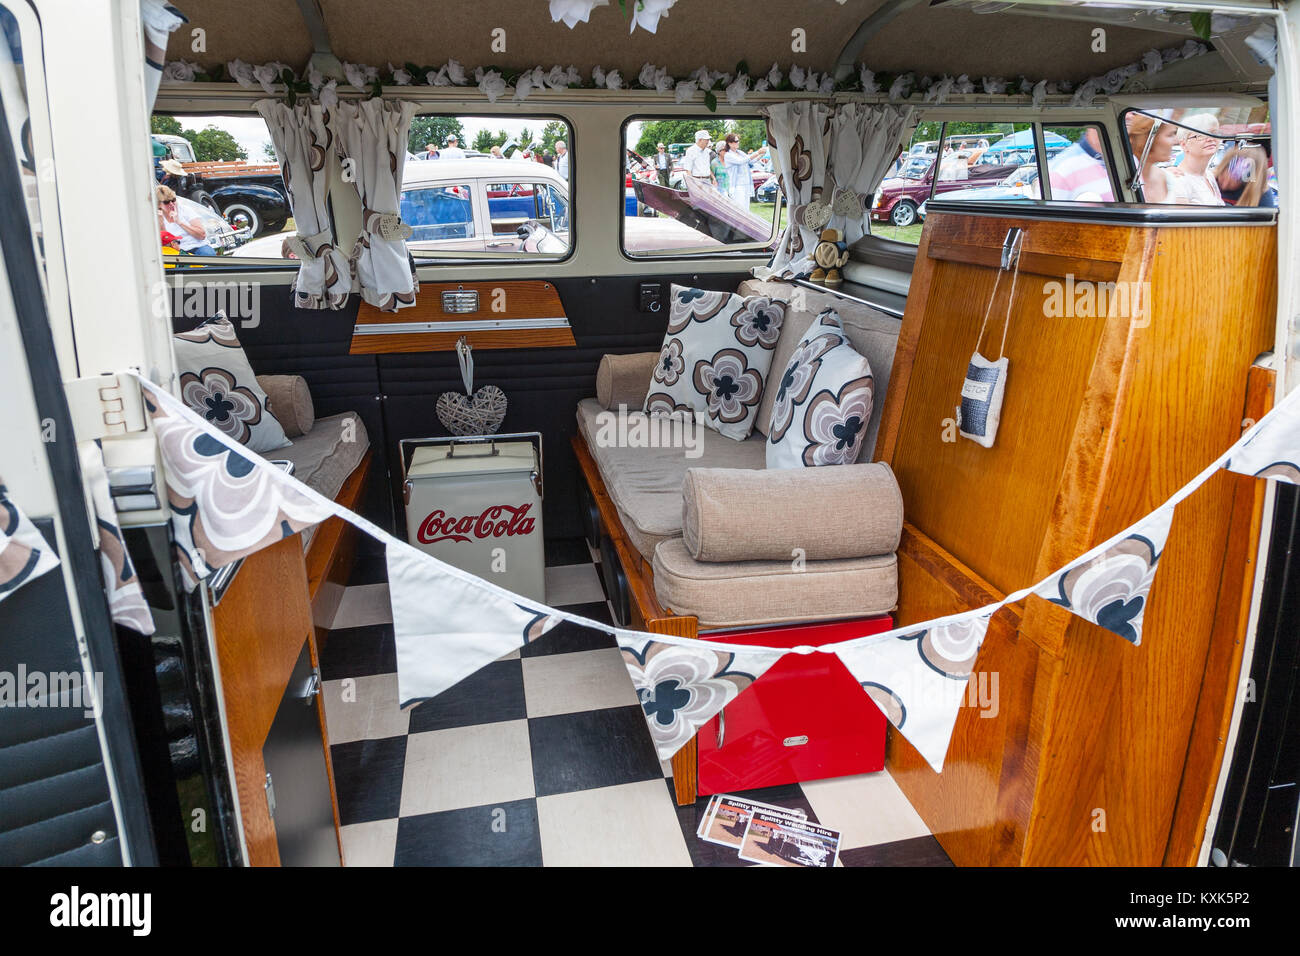 The Interior Of A Vintage Vw Camper Van At The 2016 Classic